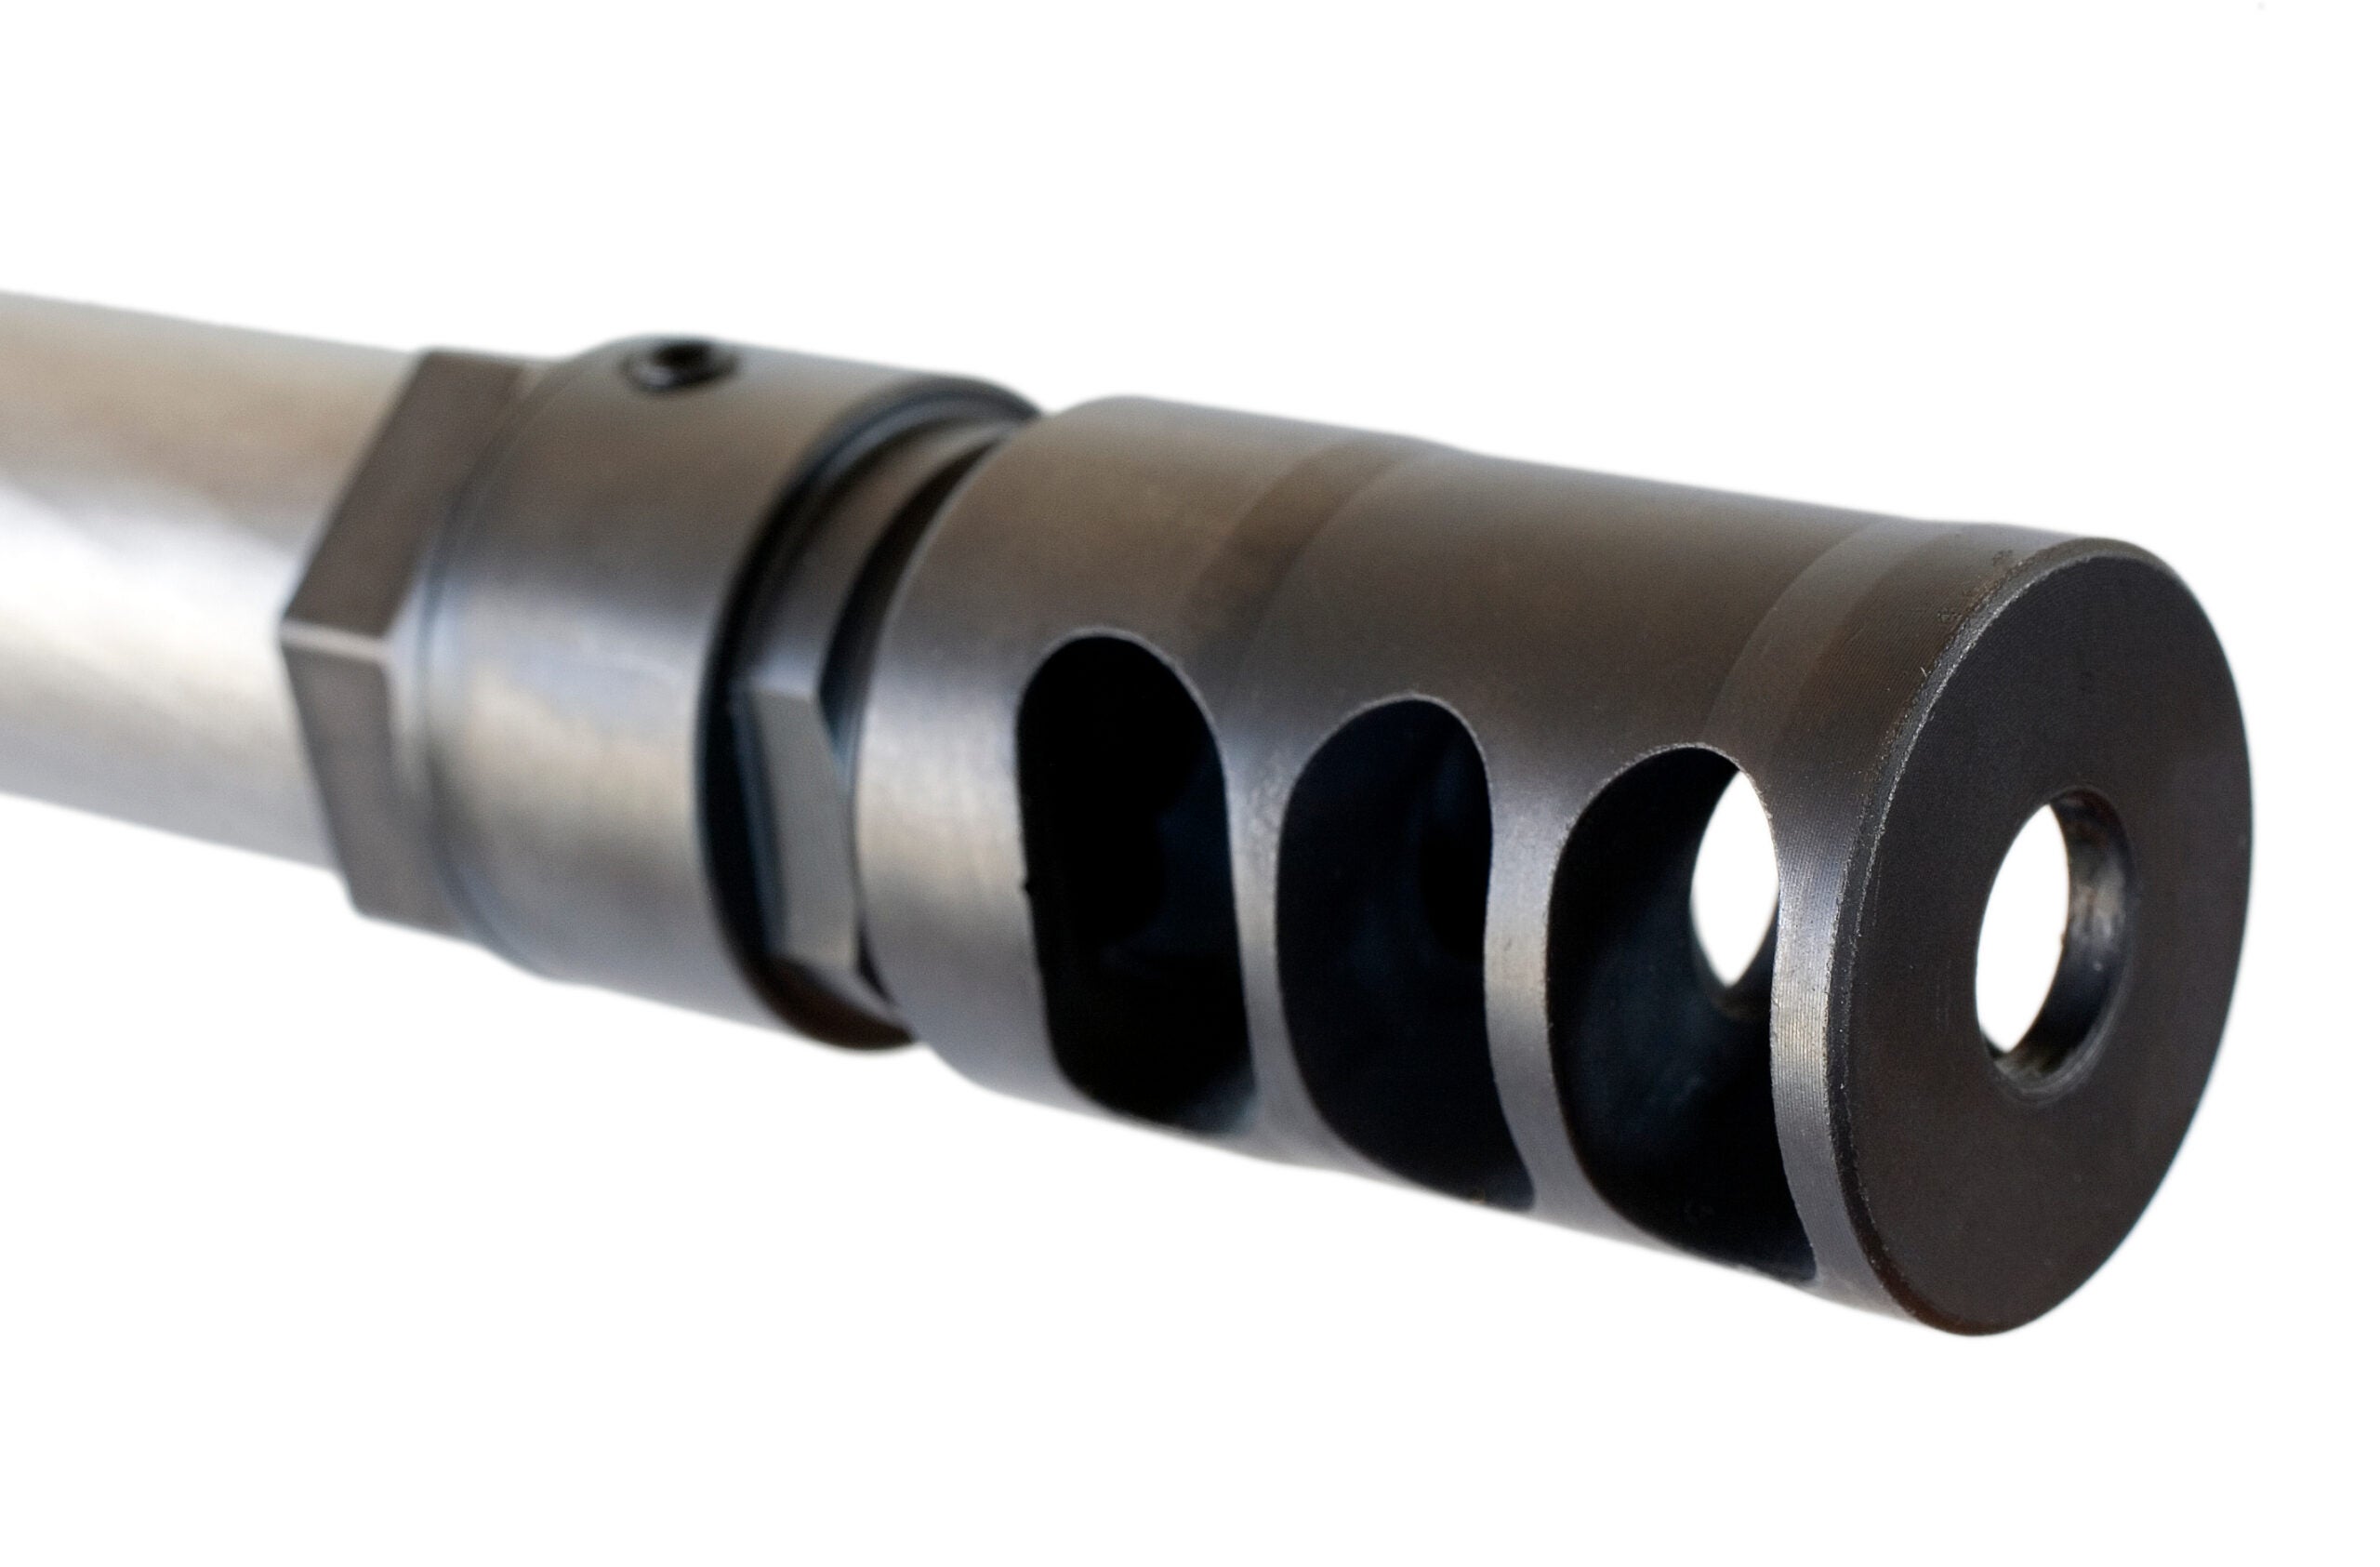 photo of a muzzle brake at the end of a rifle barrel